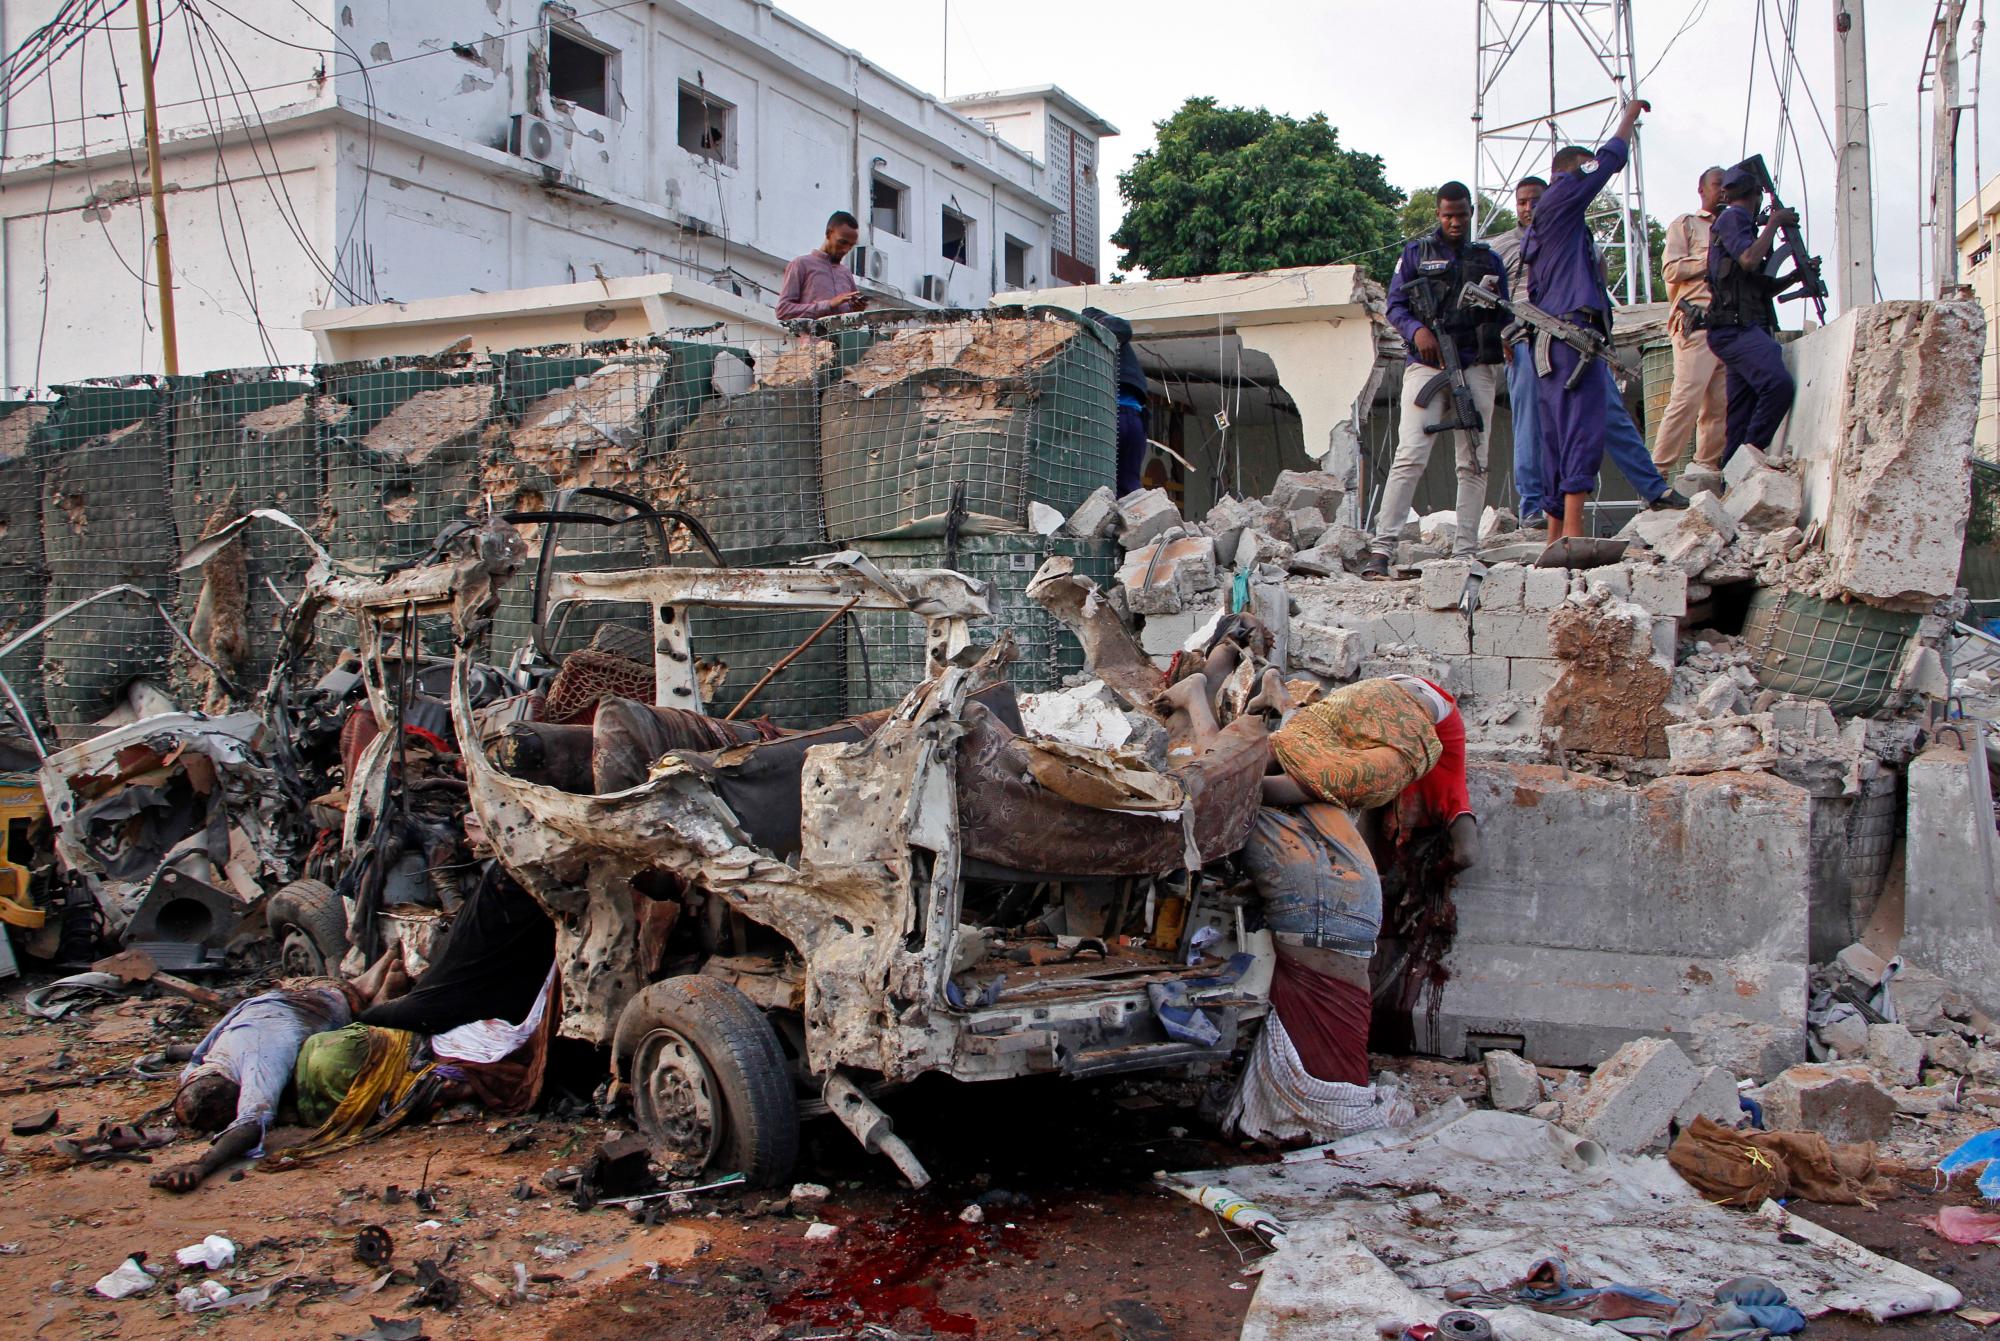 Security forces stand near bodies and the wreckage of vehicles at the scene of a bomb blast near the Sahafi hotel in the capital Mogadishu, Somalia Friday, Nov. 9, 2018. Four car bombs by Islamic extremists exploded outside the hotel, which is located across the street from the police Criminal Investigations Department, killing at least 20 people according to police. (AP Photo/Farah Abdi Warsameh)